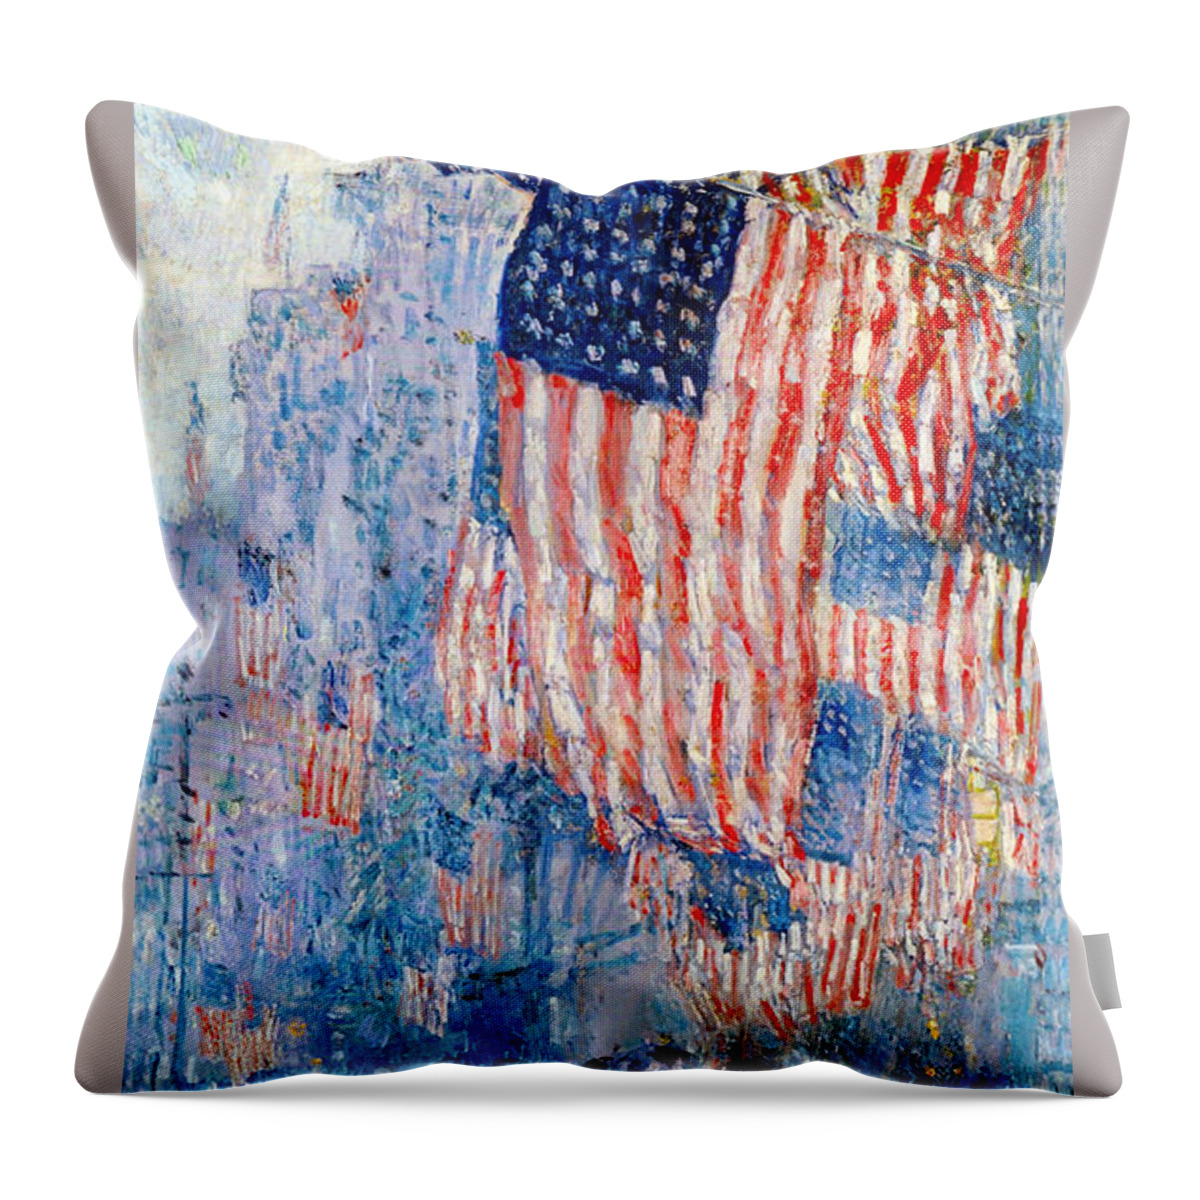 #faatoppicks Throw Pillow featuring the digital art The Avenue In The Rain by Frederick Childe Hassam